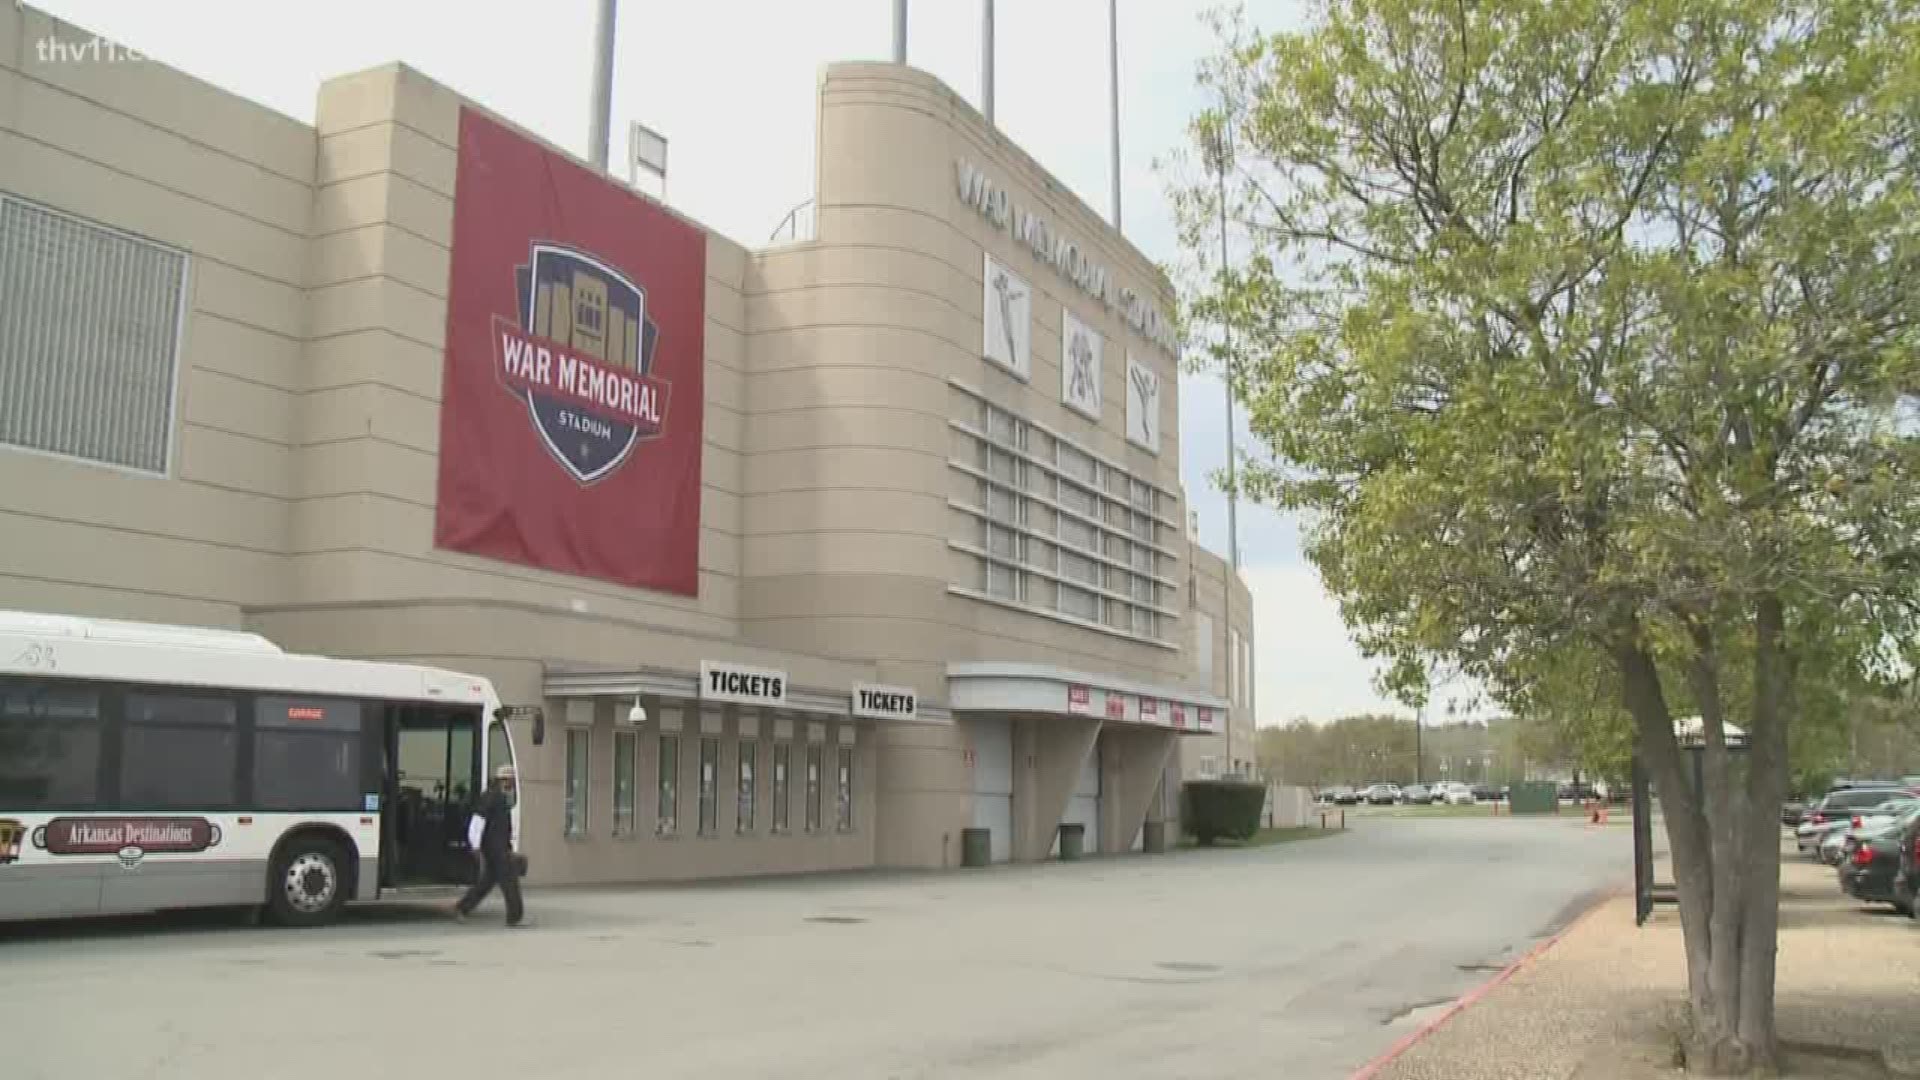 Safety upgrades have arrived at War Memorial Stadium ahead of next month's Arkansas vs. Ole Miss game.